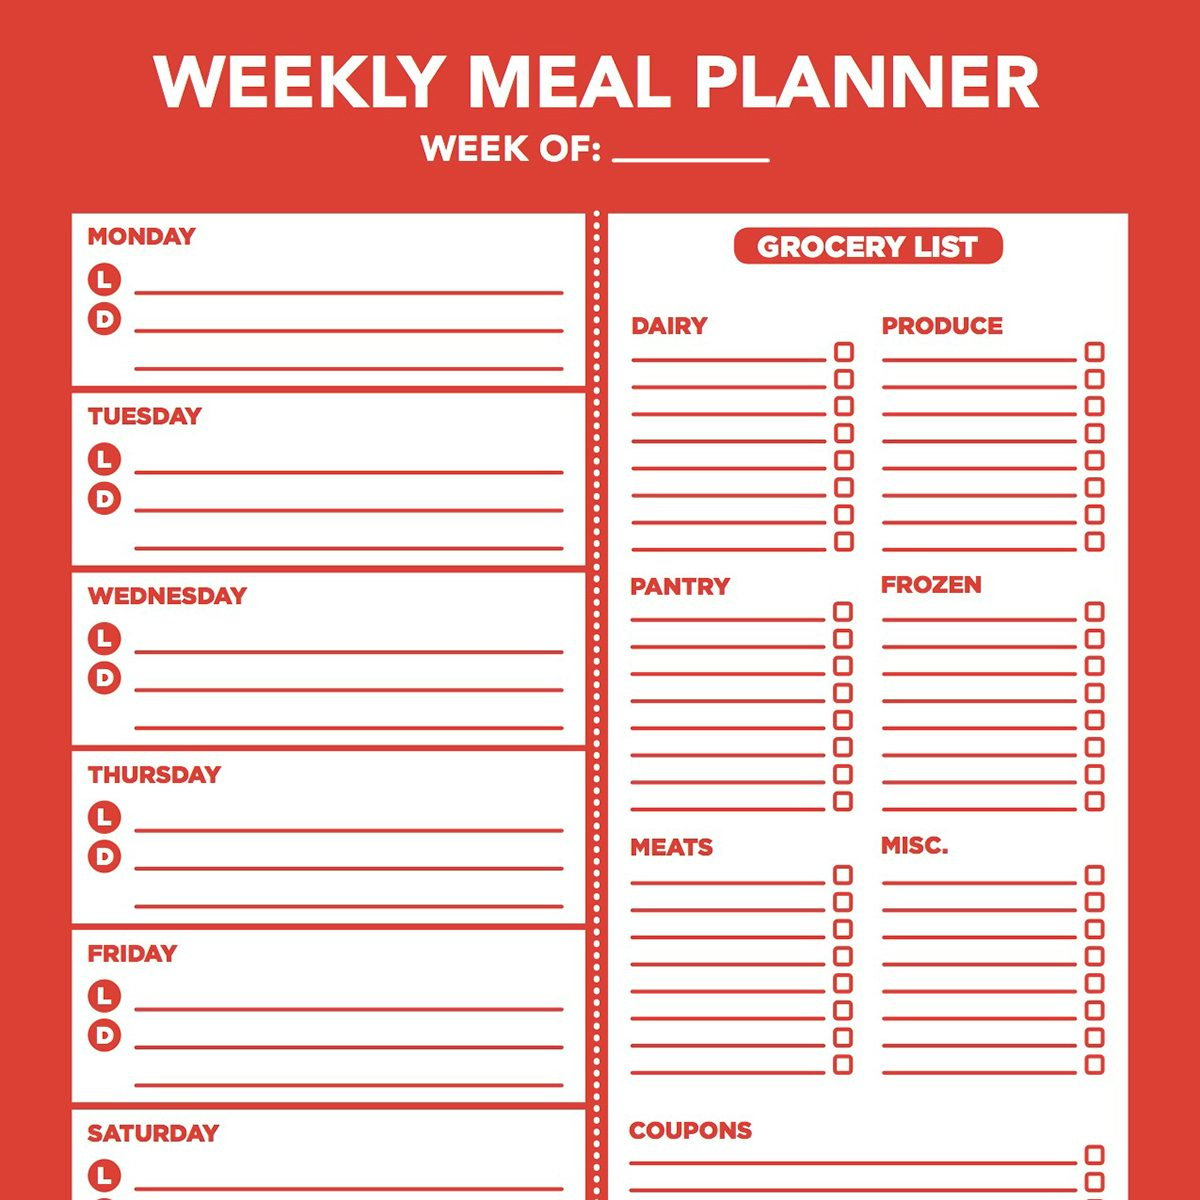 Menu Planning Products